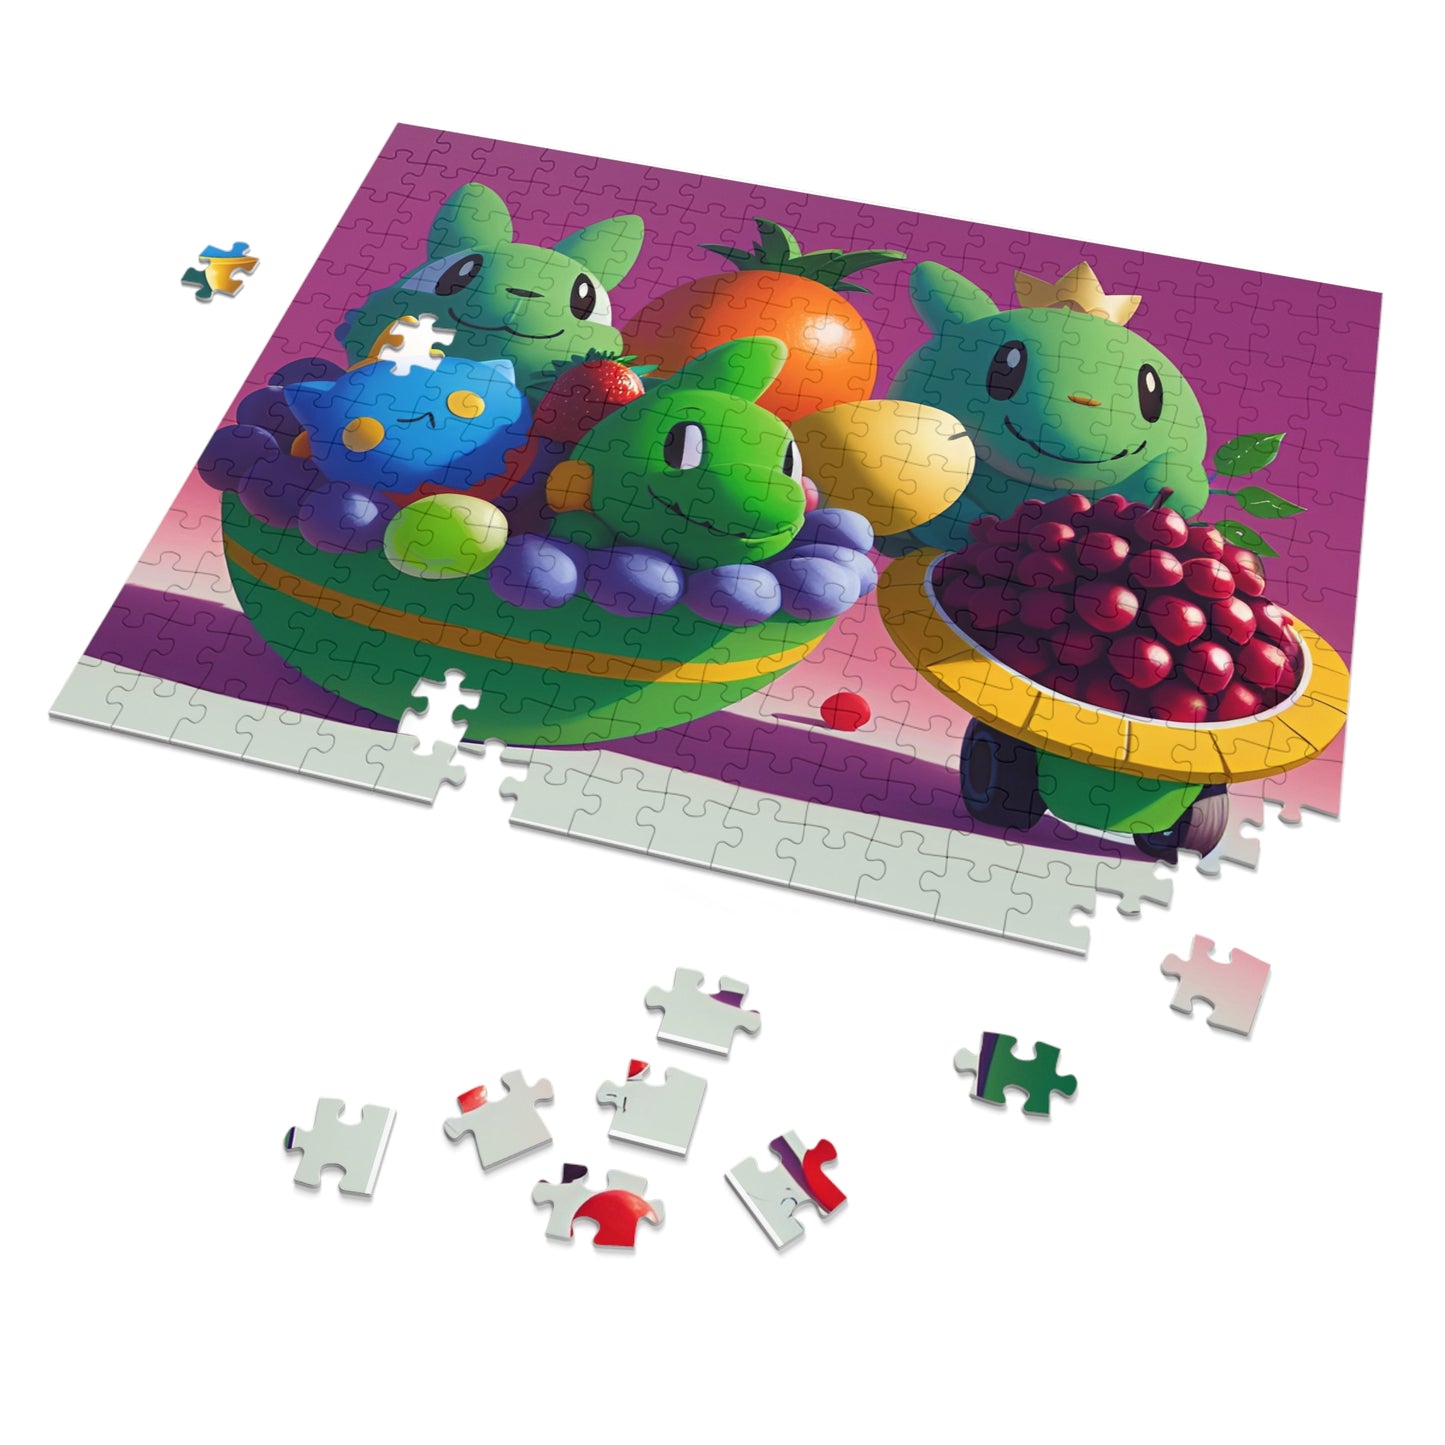 Video Game Inspired Jigsaw Puzzle, 252-Piece